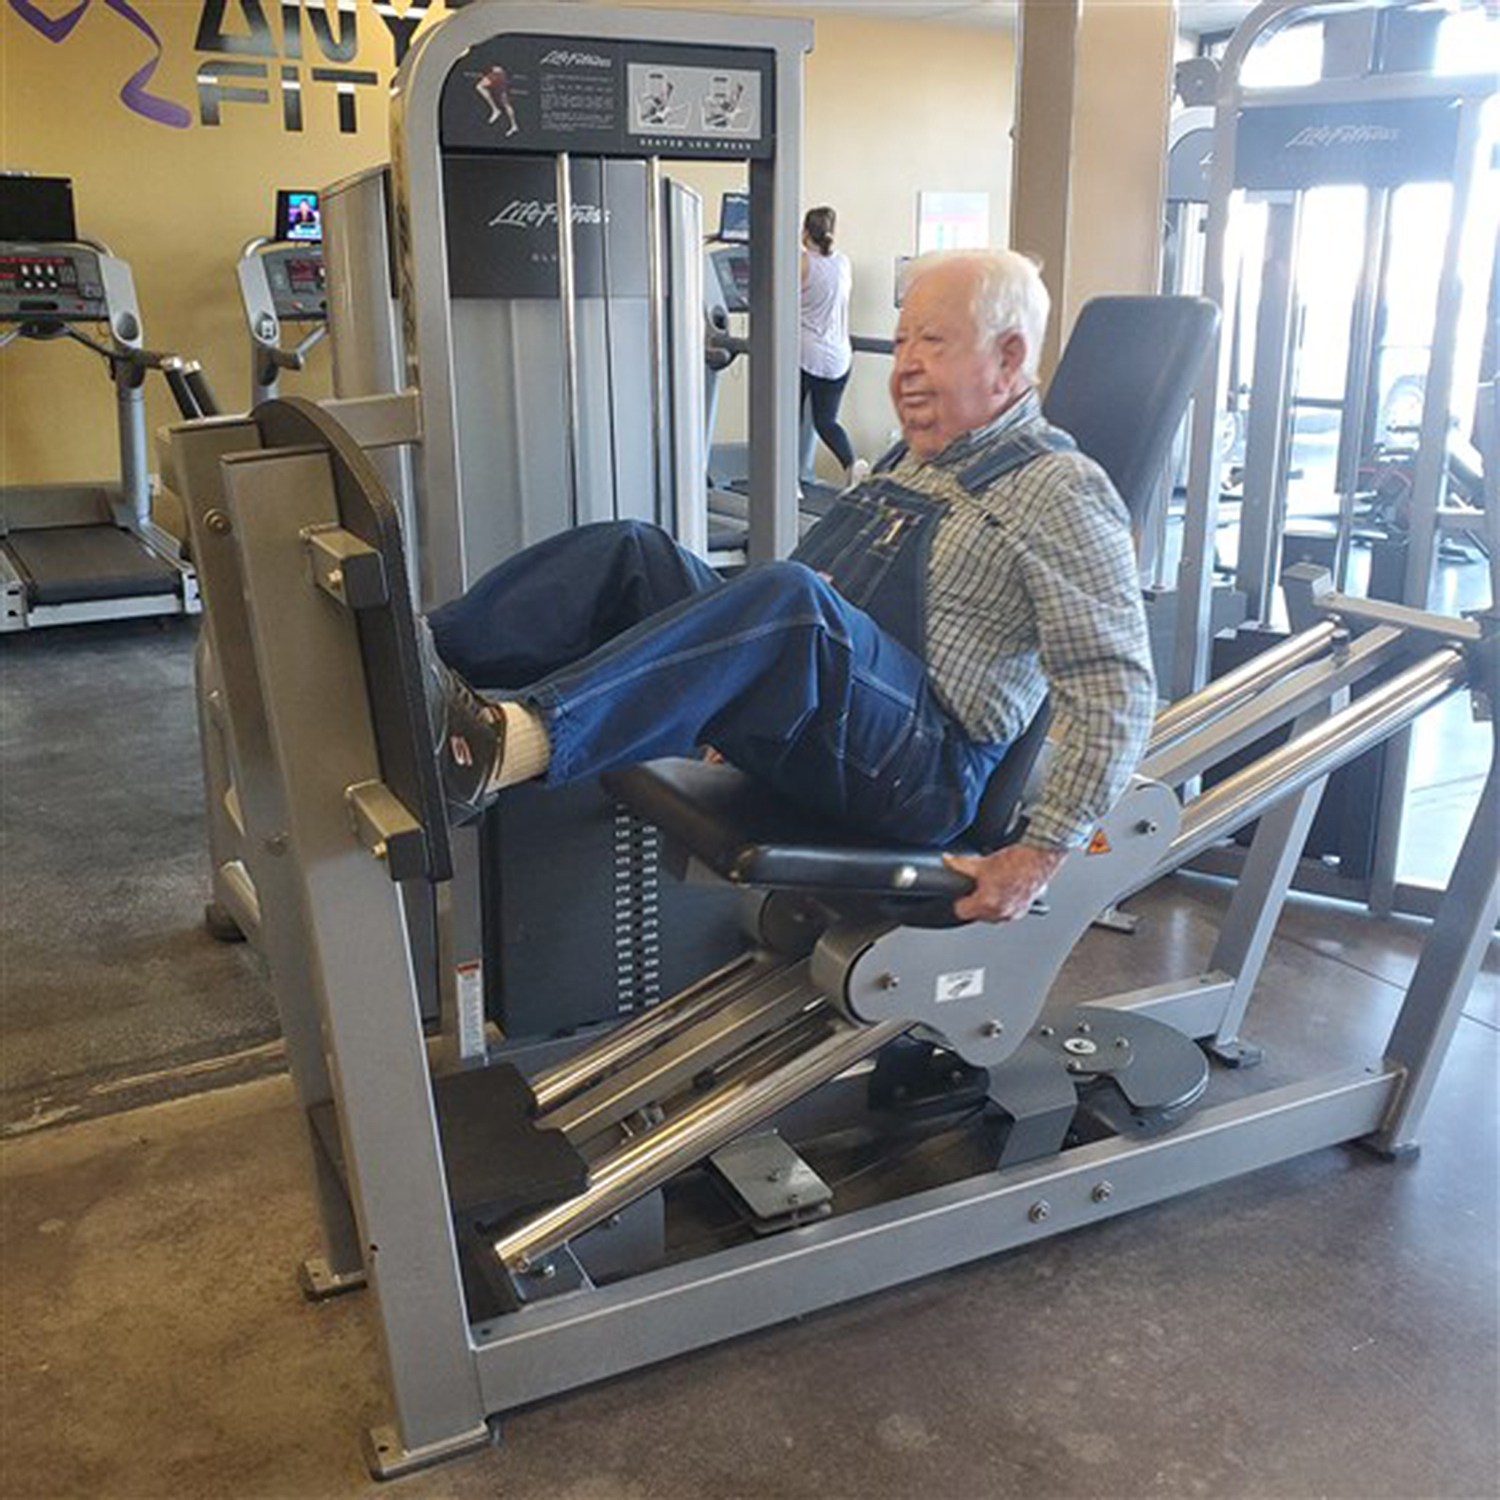 91-Year-Old Man Works Out In Overalls Every Day At His Local Gym